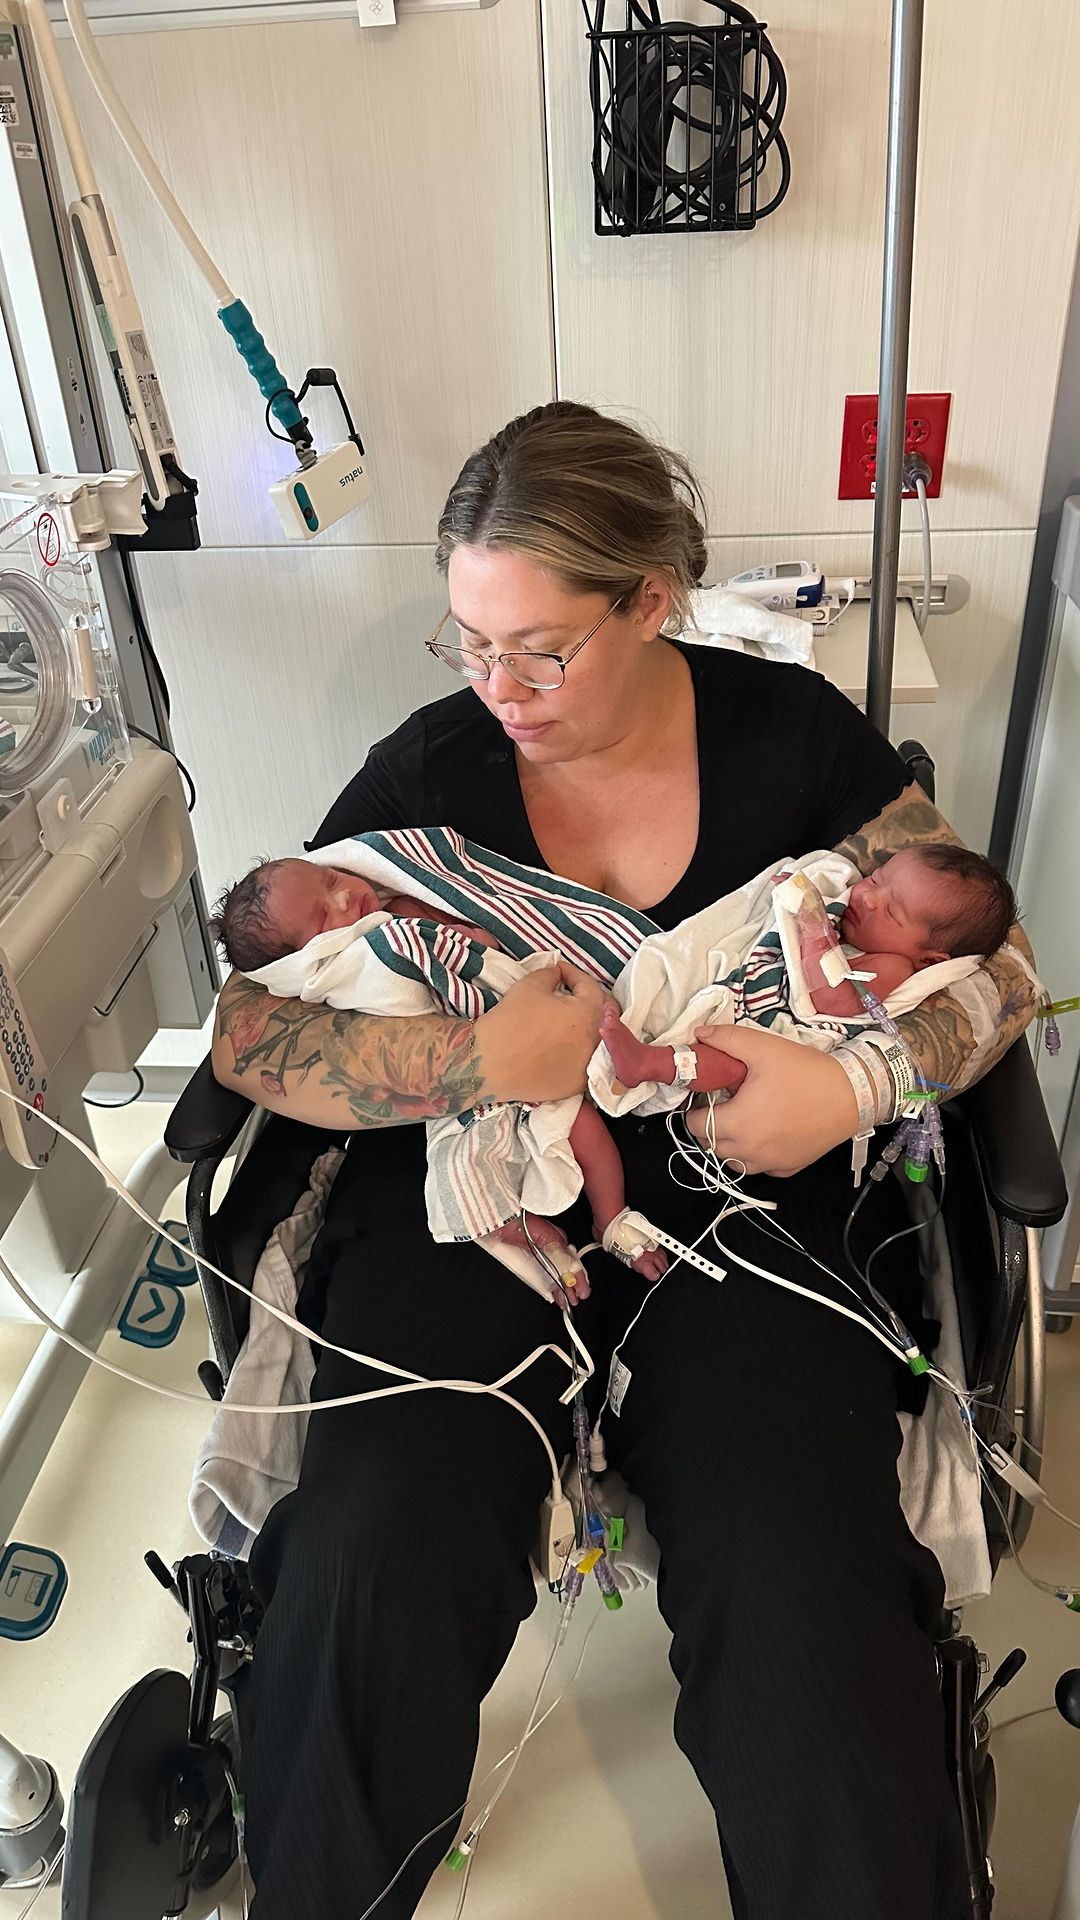 Kailyn previously revealed that the twins - Verse and Valley - were kept in intensive care after their birth